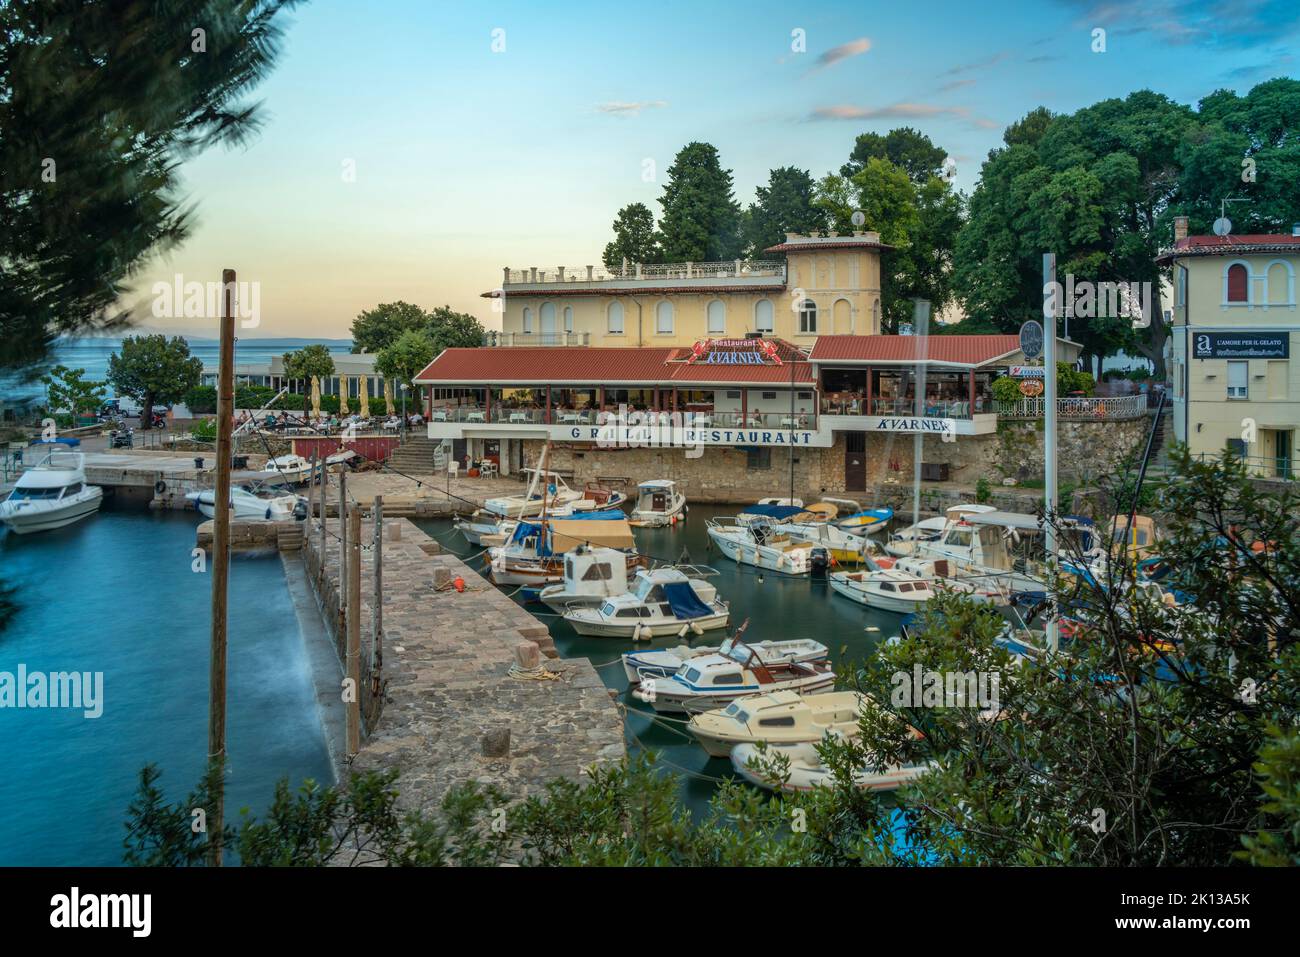 View of cafe and restaurant overlooking boats in harbour, Lovran village, Lovran, Kvarner Bay, Eastern Istria, Croatia, Europe Stock Photo